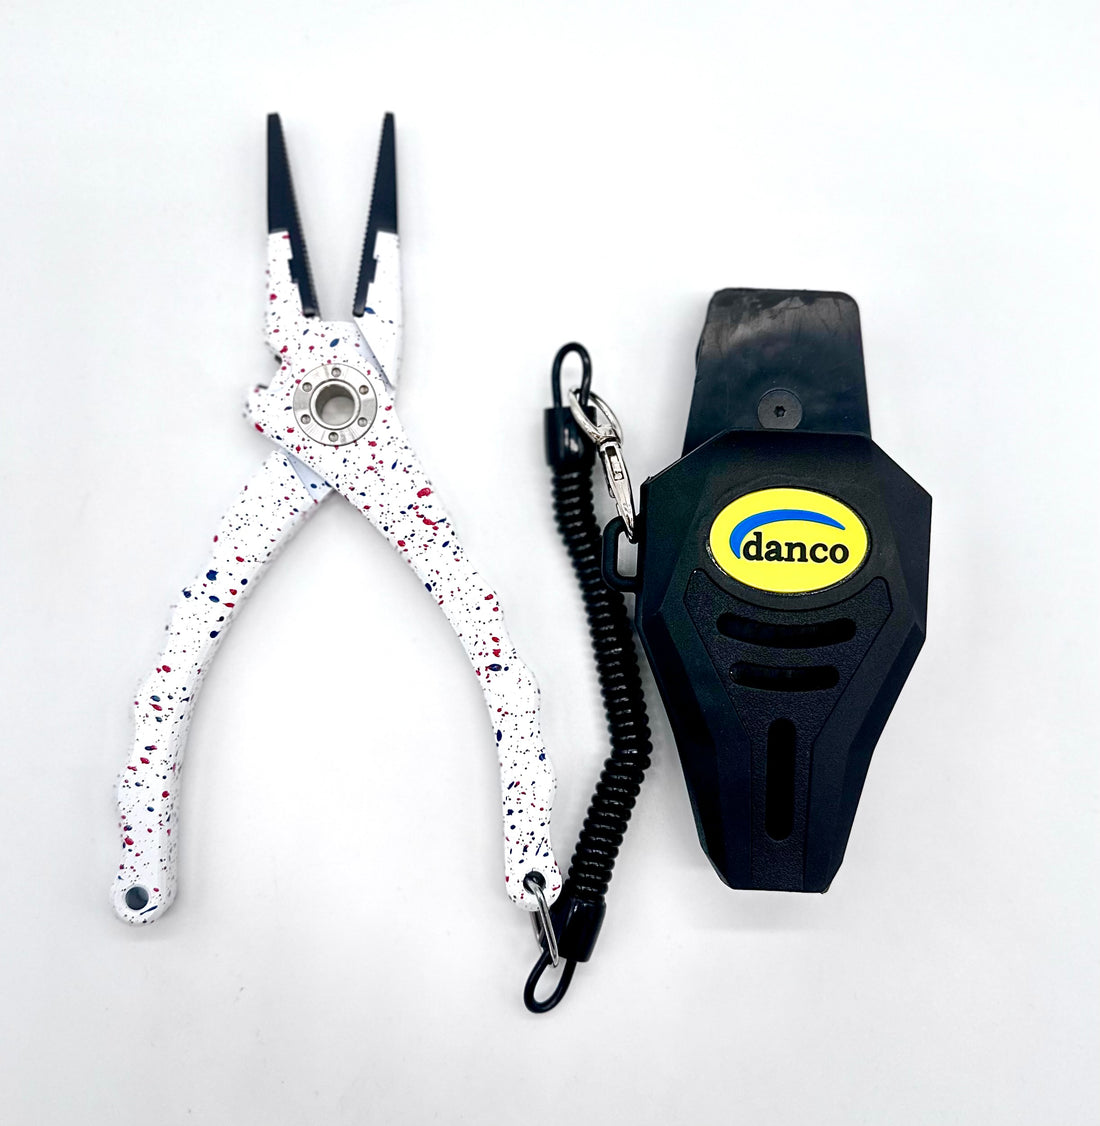 danco pliers - Starting at $99.99. Booth 822.